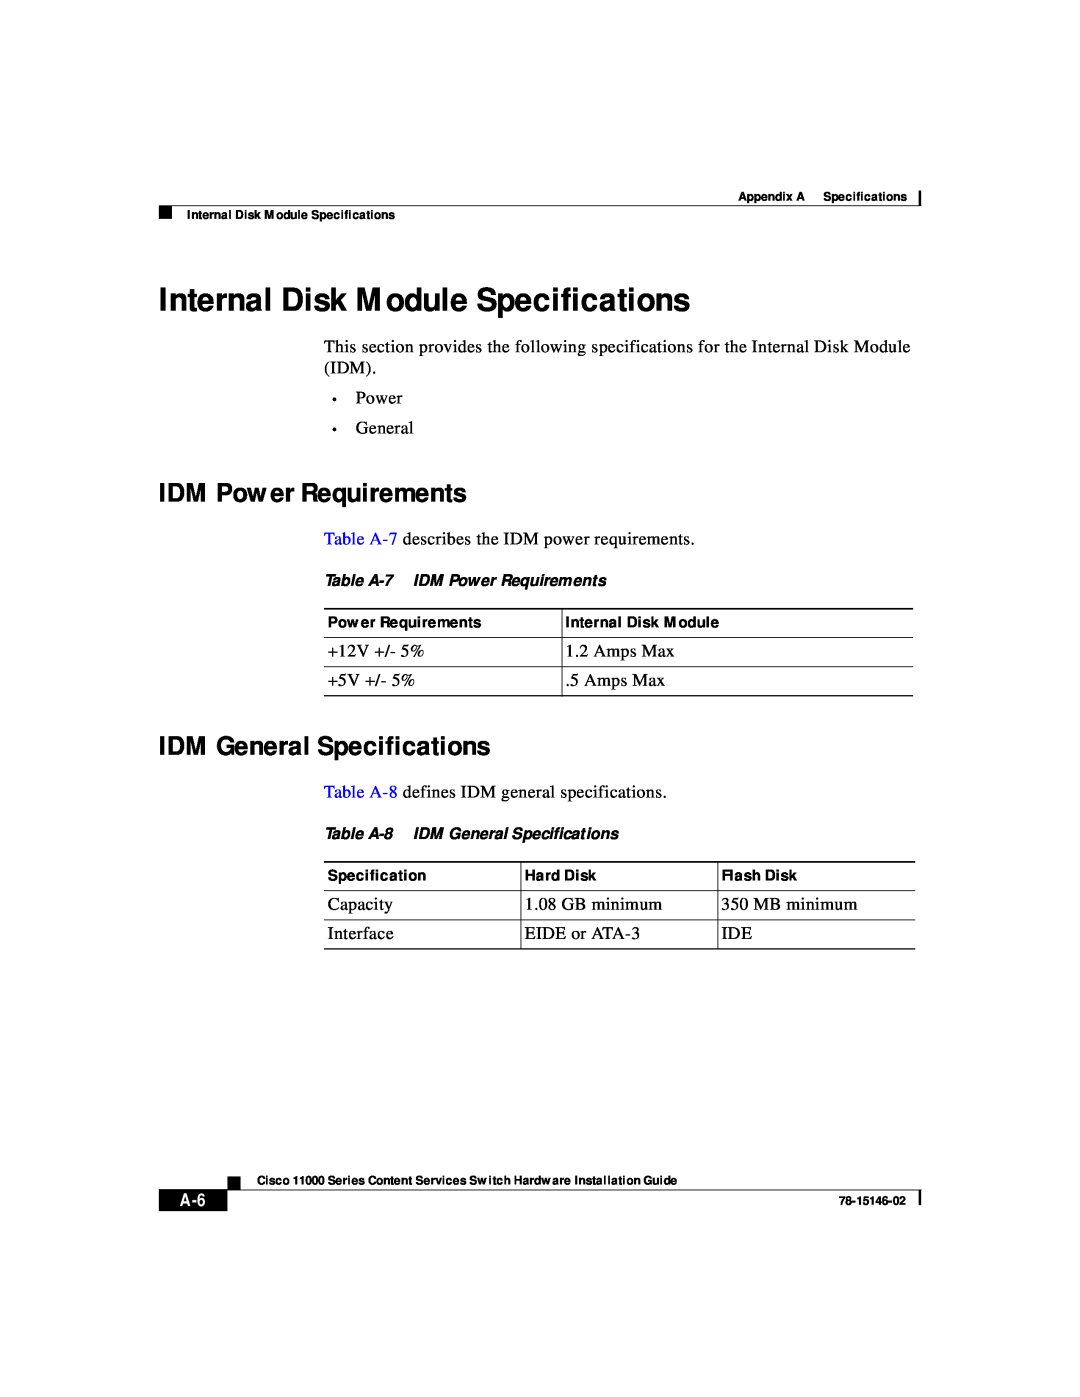 Cisco Systems 11000 Series manual Internal Disk Module Specifications, IDM Power Requirements, IDM General Specifications 